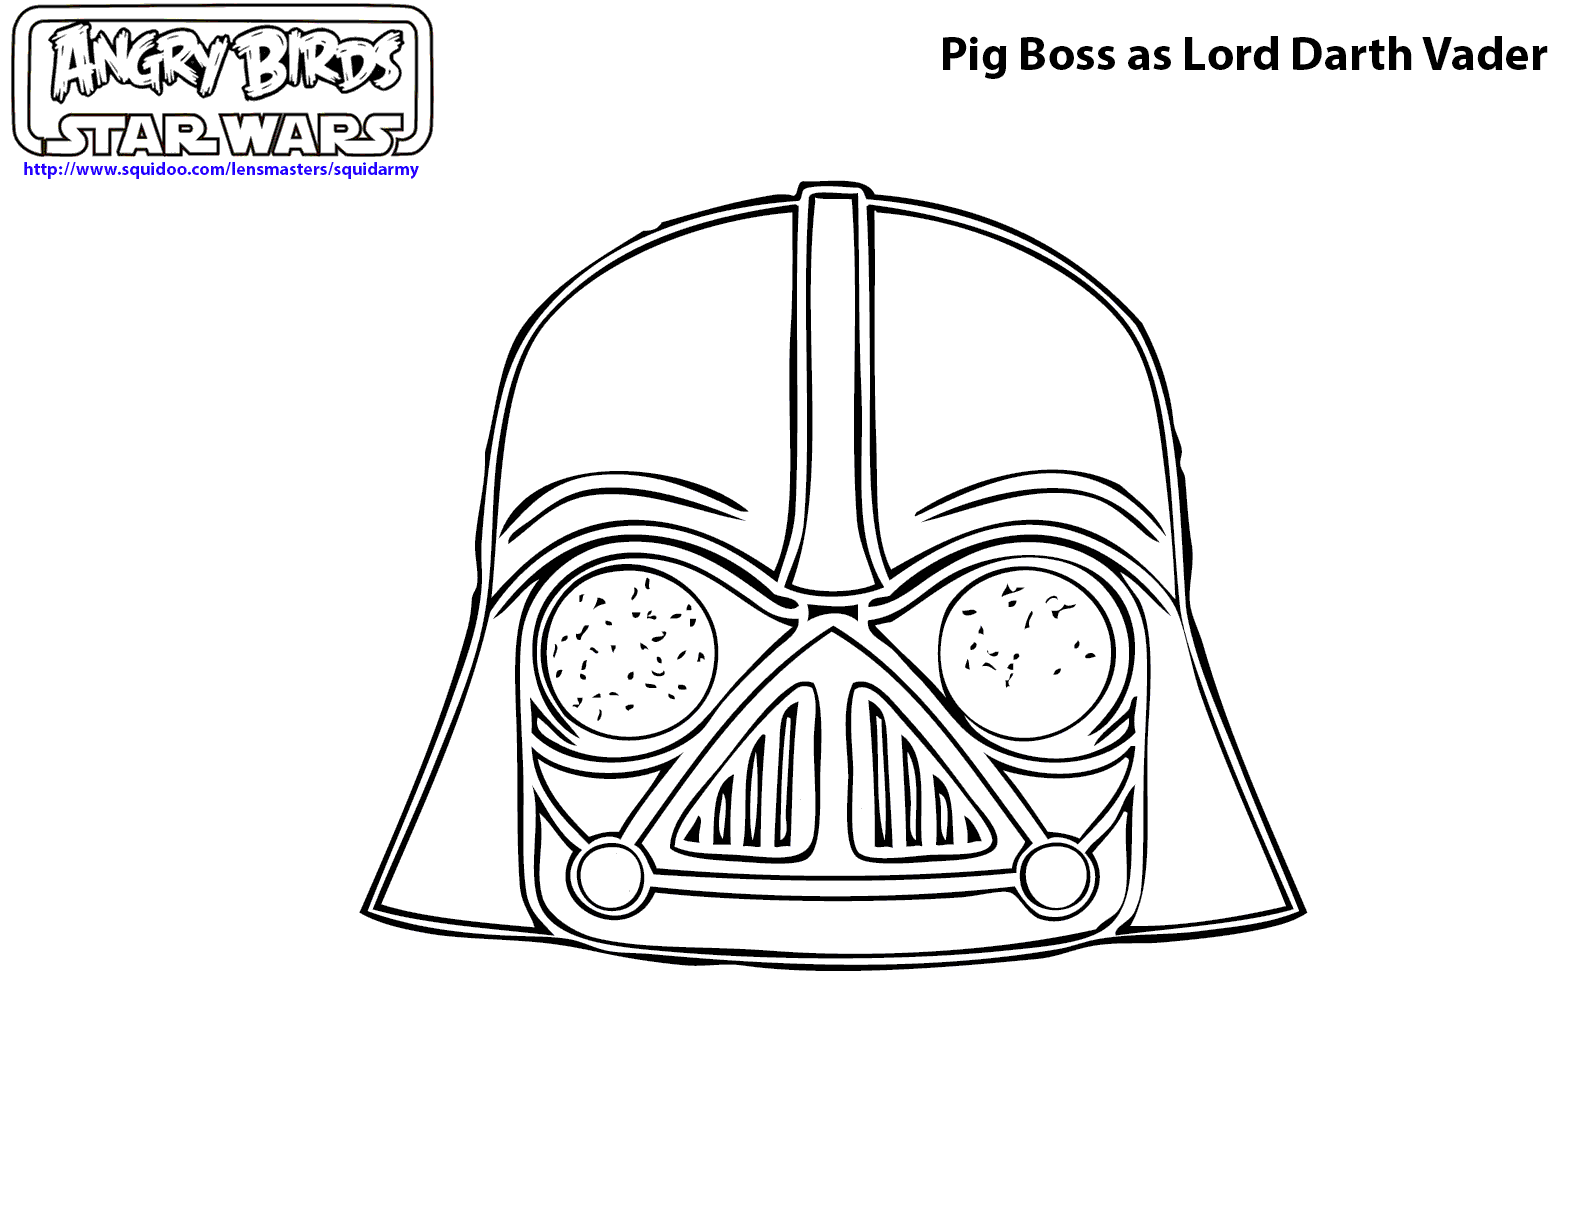 angry birds star wars coloring pages pigs